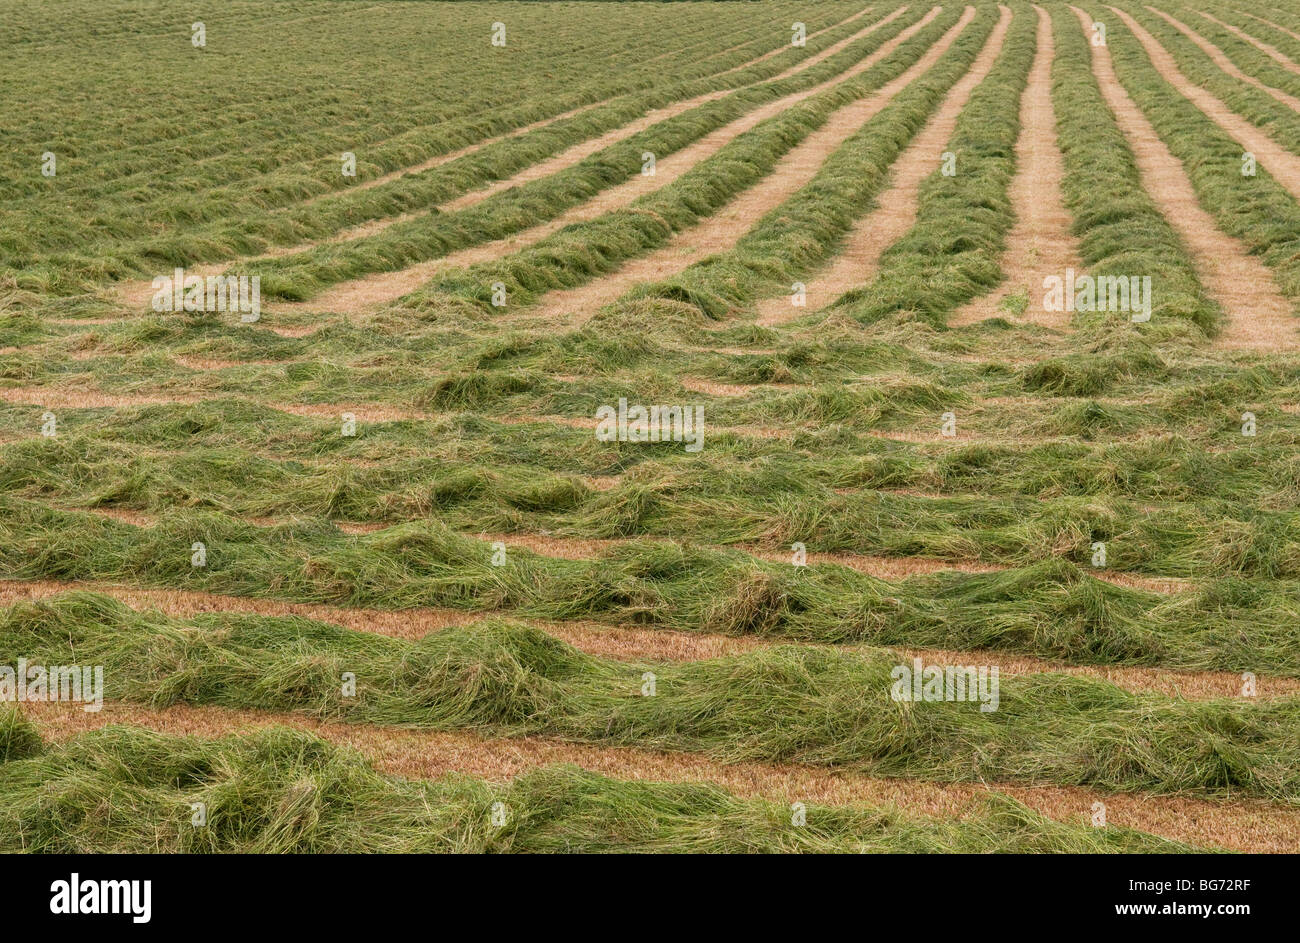 Swathes of grass cut for silage production, UK Stock Photo